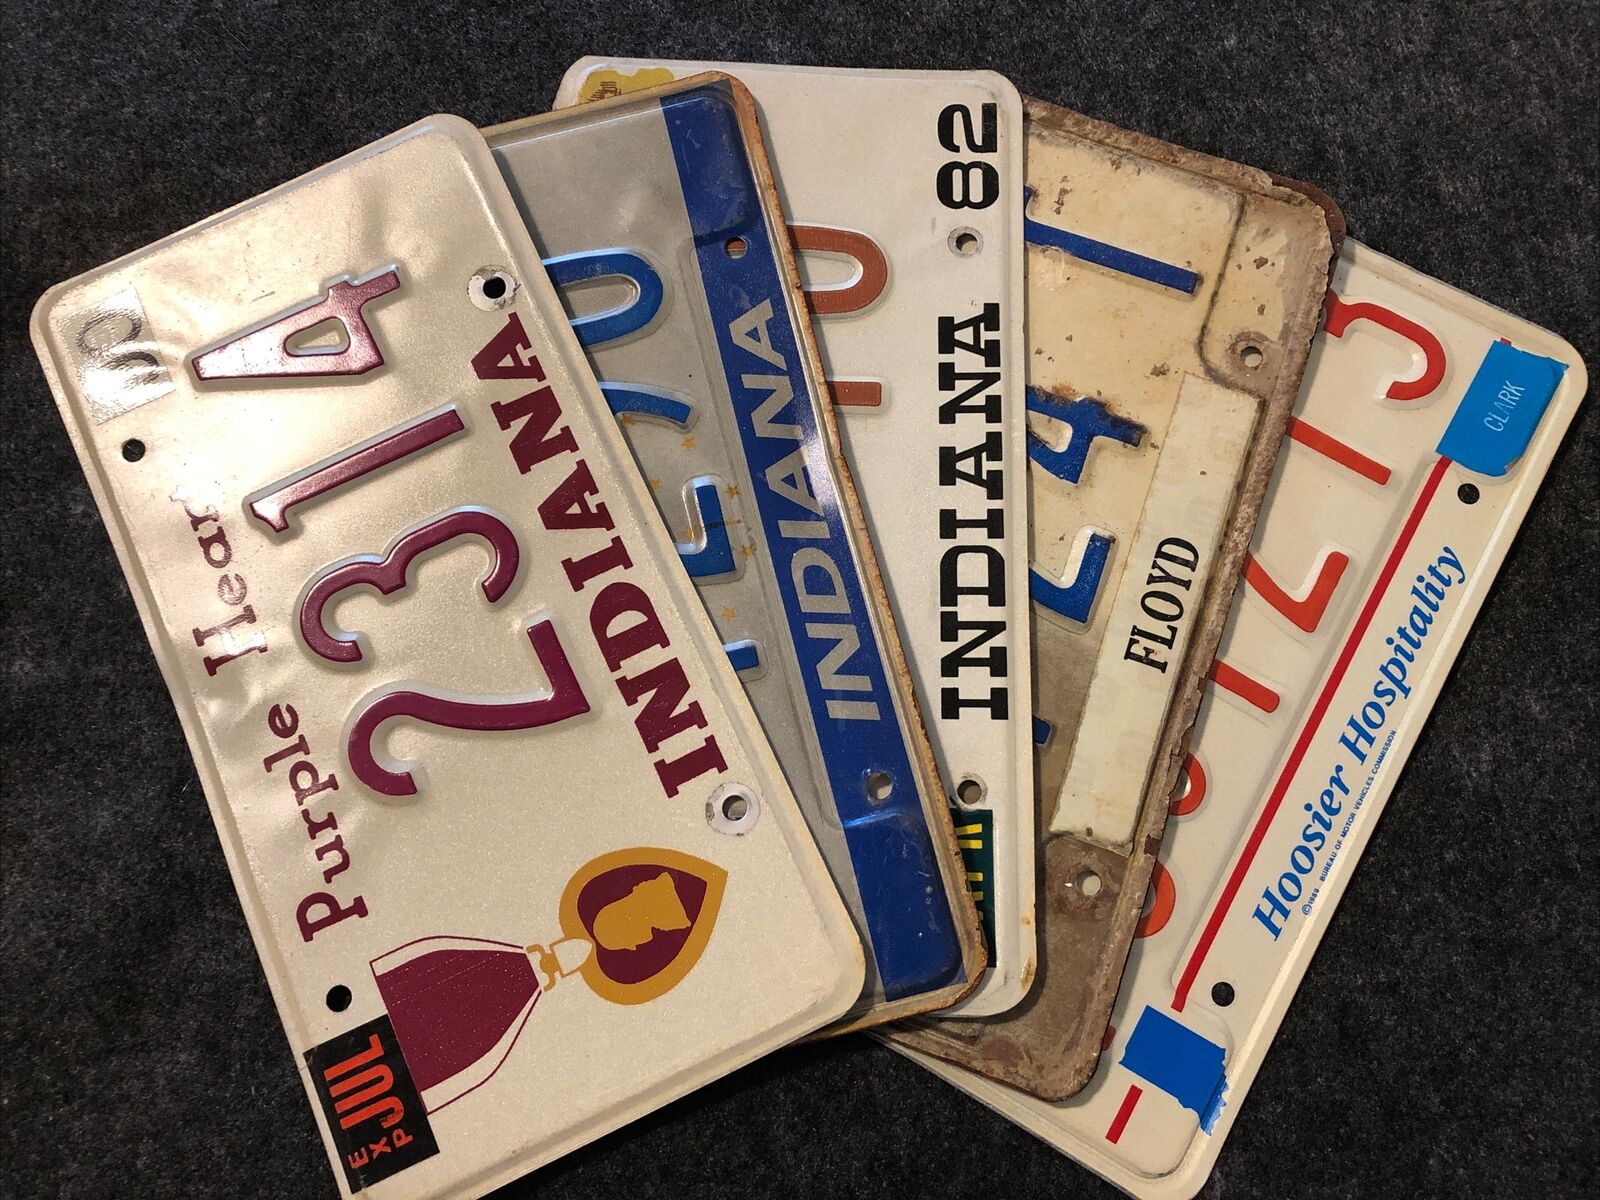 Lot of 5 Indiana License Plates Expired / Vintage, 1982, 1989, 1989, 1990, 1993